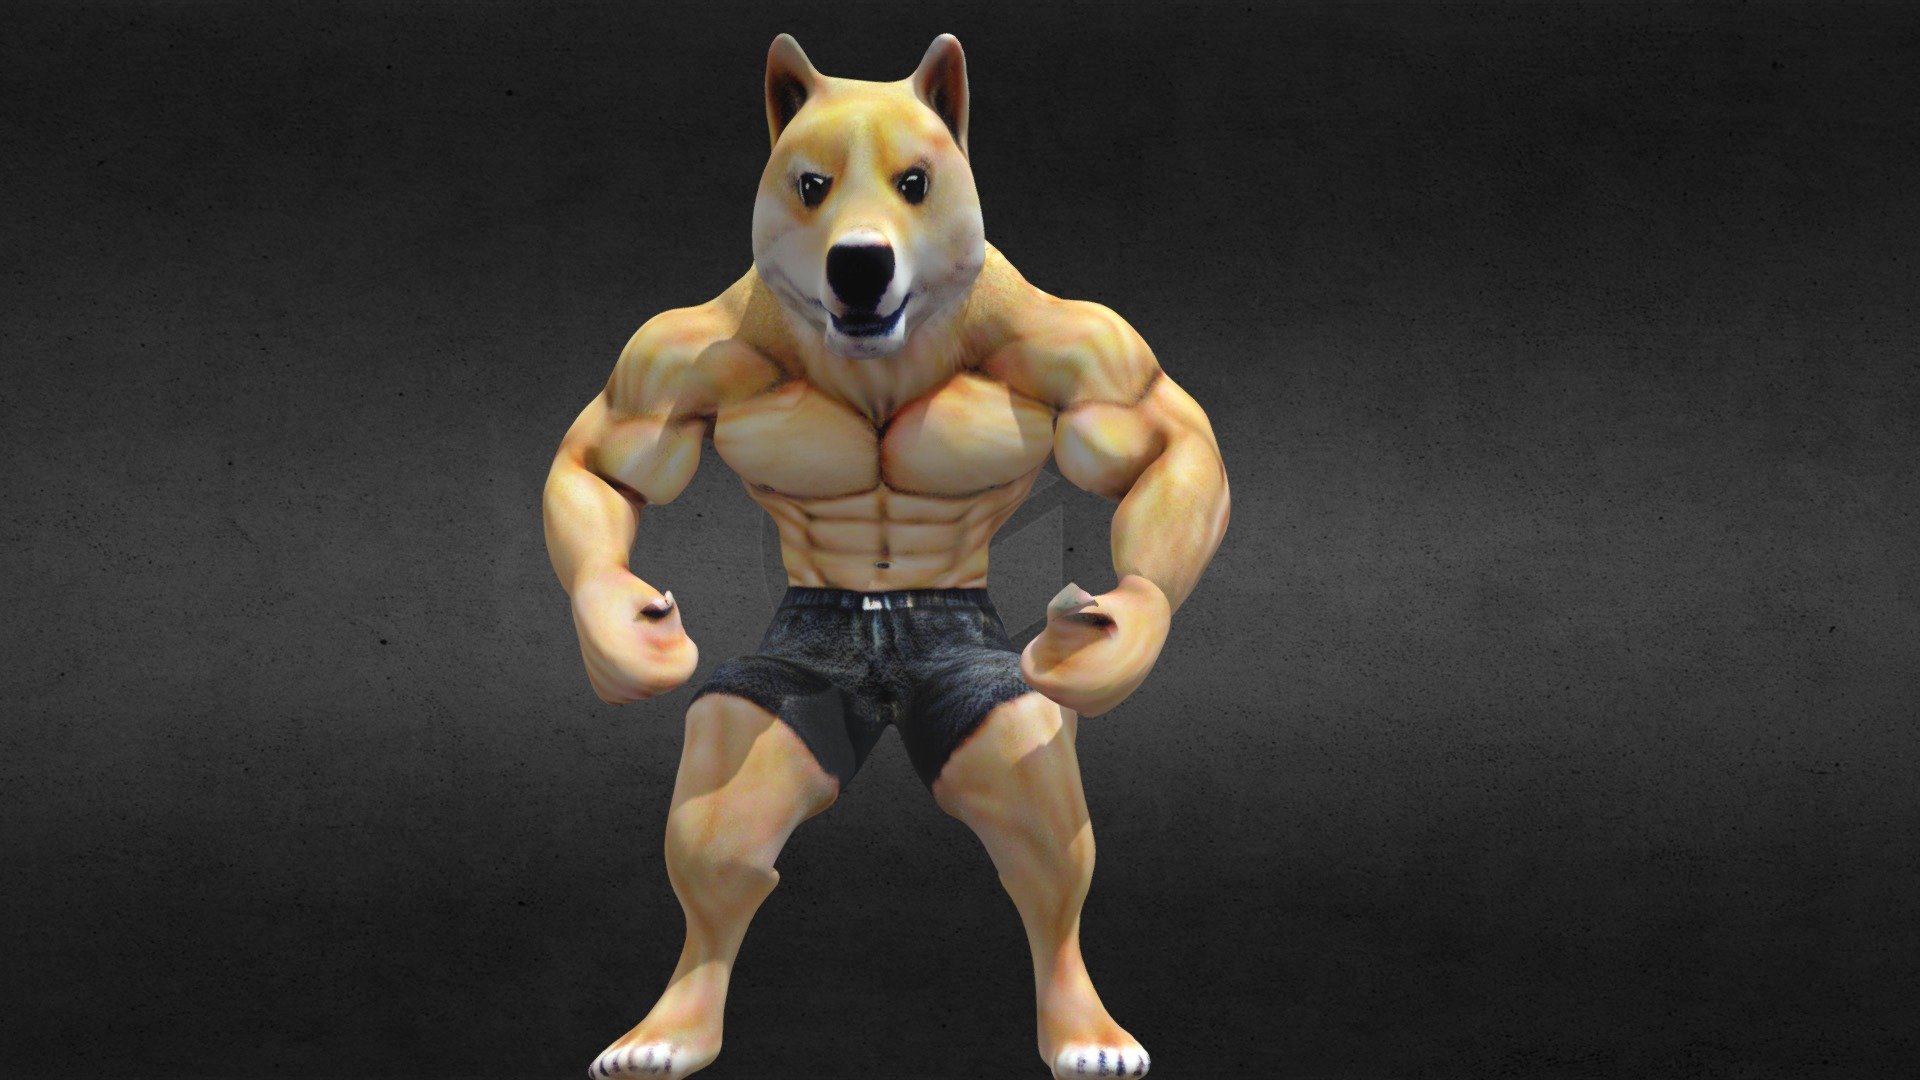 Super Muscular Bodybuilder Doge 3D Model: This model is a playful and exaggerated representation of the popular Doge meme, transformed into a muscular bodybuilder. Perfect for humorous games, animations, or as a unique digital art piece, this Doge character combines the internet-famous Shiba Inu with an over-the-top bodybuilding physique. Compatible with various 3D software and game engines, it's designed for both commercial and non-commercial use.

Key Features:

Auto-rig with animation from Mixamo
Humorous blend of Doge meme and bodybuilder physique.
Exaggerated muscular build on a Shiba Inu frame.
Ideal for comedic games, animations, and digital art.
High-quality model with detailed textures.
Compatible with major 3D software and game engines.

Made with AI - Super Muscular Bodybuilder Doge - Buy Royalty Free 3D model by GAM3D (@gam3d.engine) 3d model